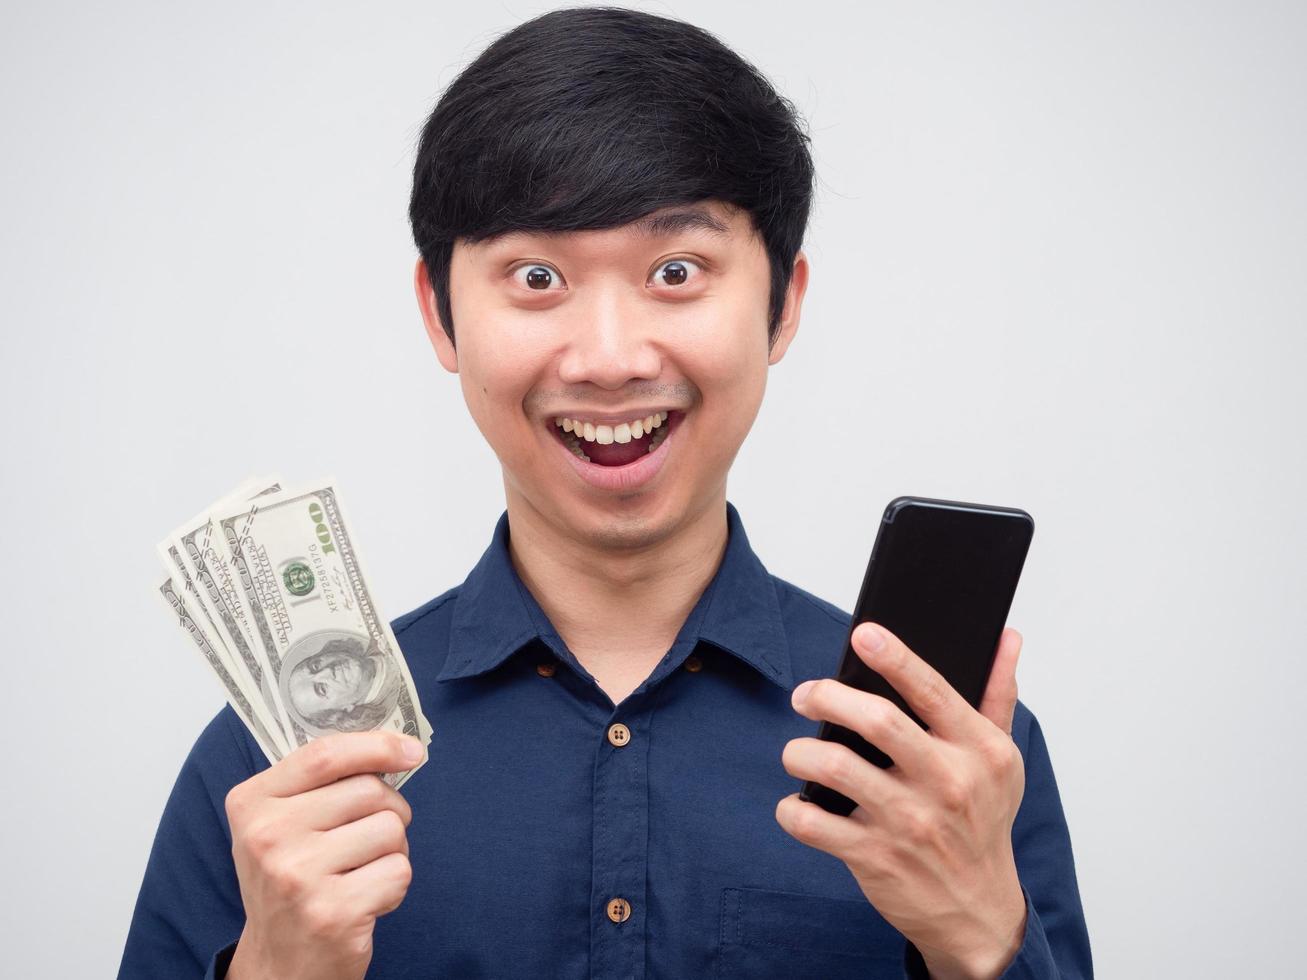 Asian man cheerful happy face holidng mobile phone and money dollar in hand portrait photo